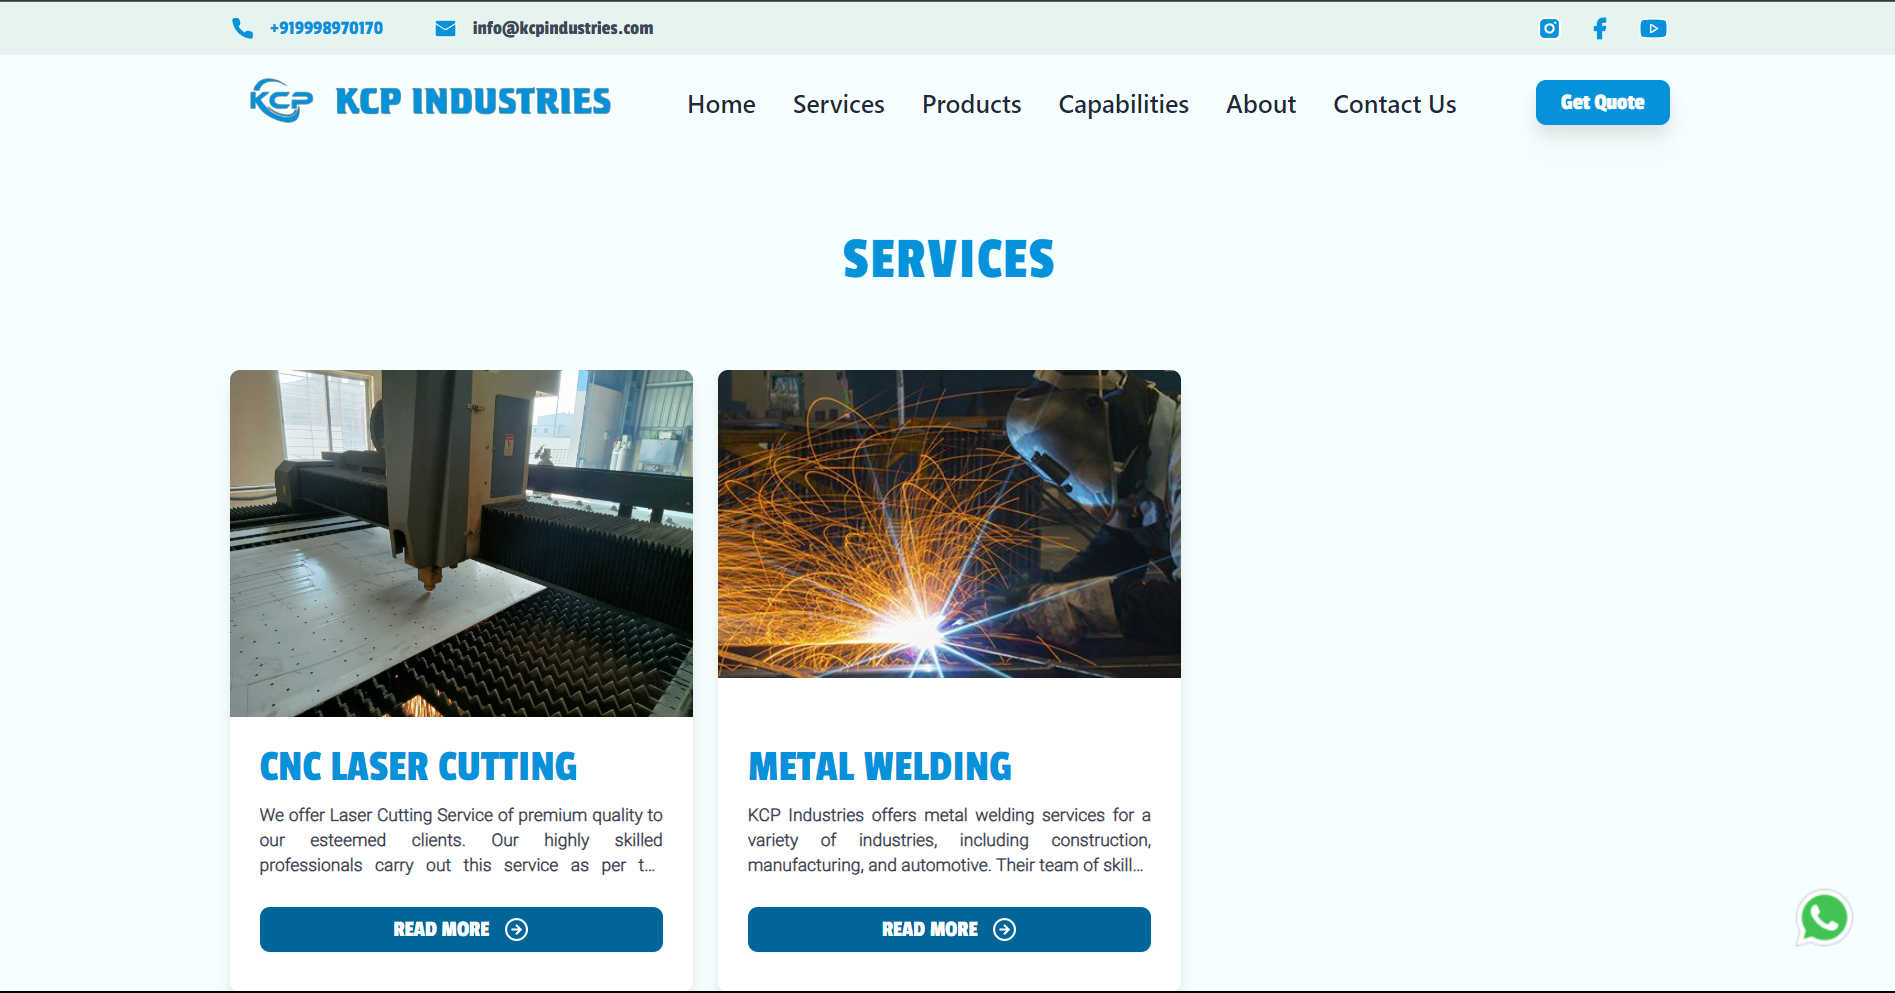 KCP Industries service page screenshot